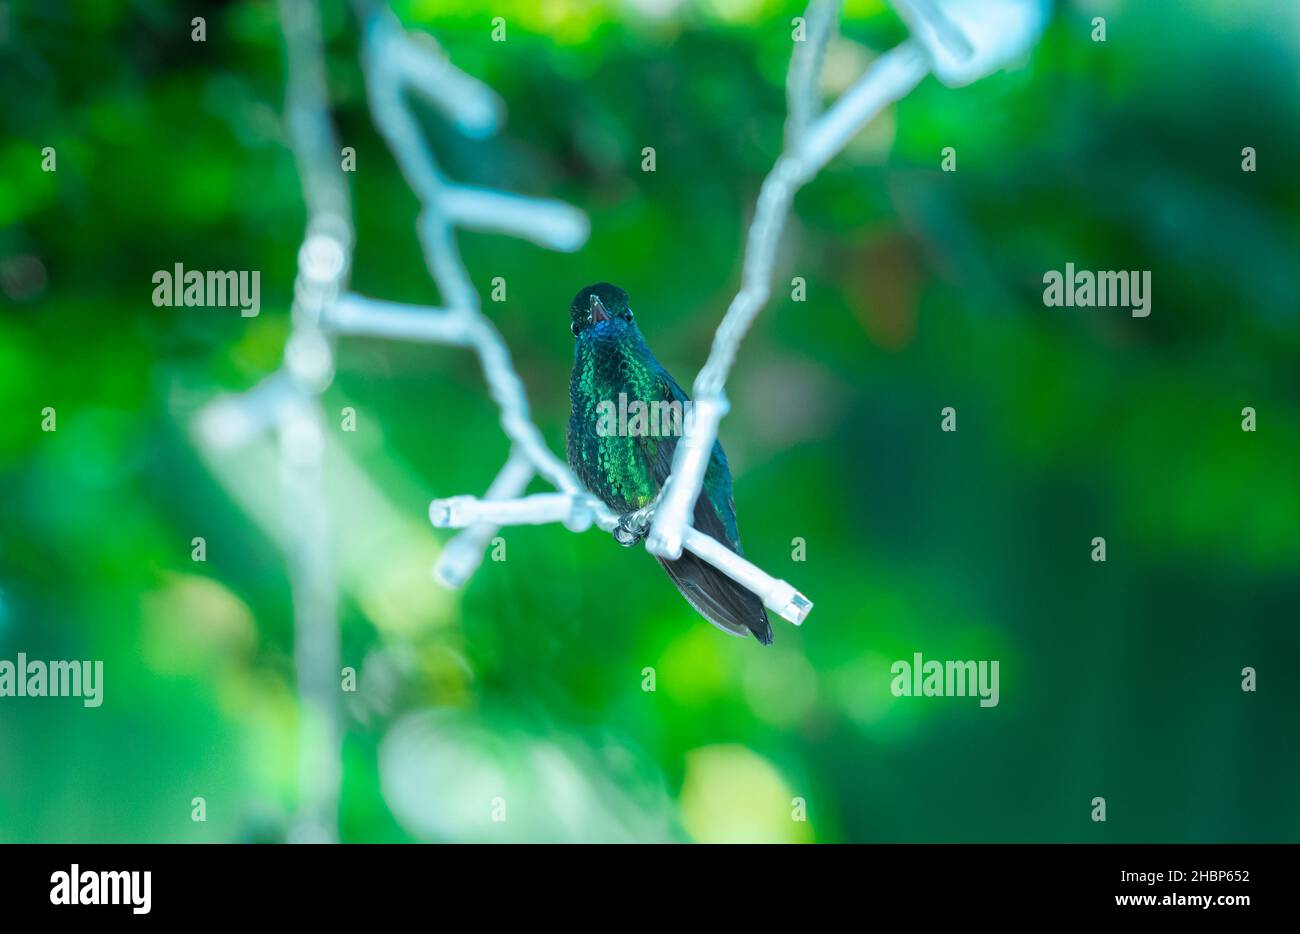 A small Blue-chinned Sapphire hummingbird, Chlorestes notata, perching on Christmas lights in cool green light. Stock Photo